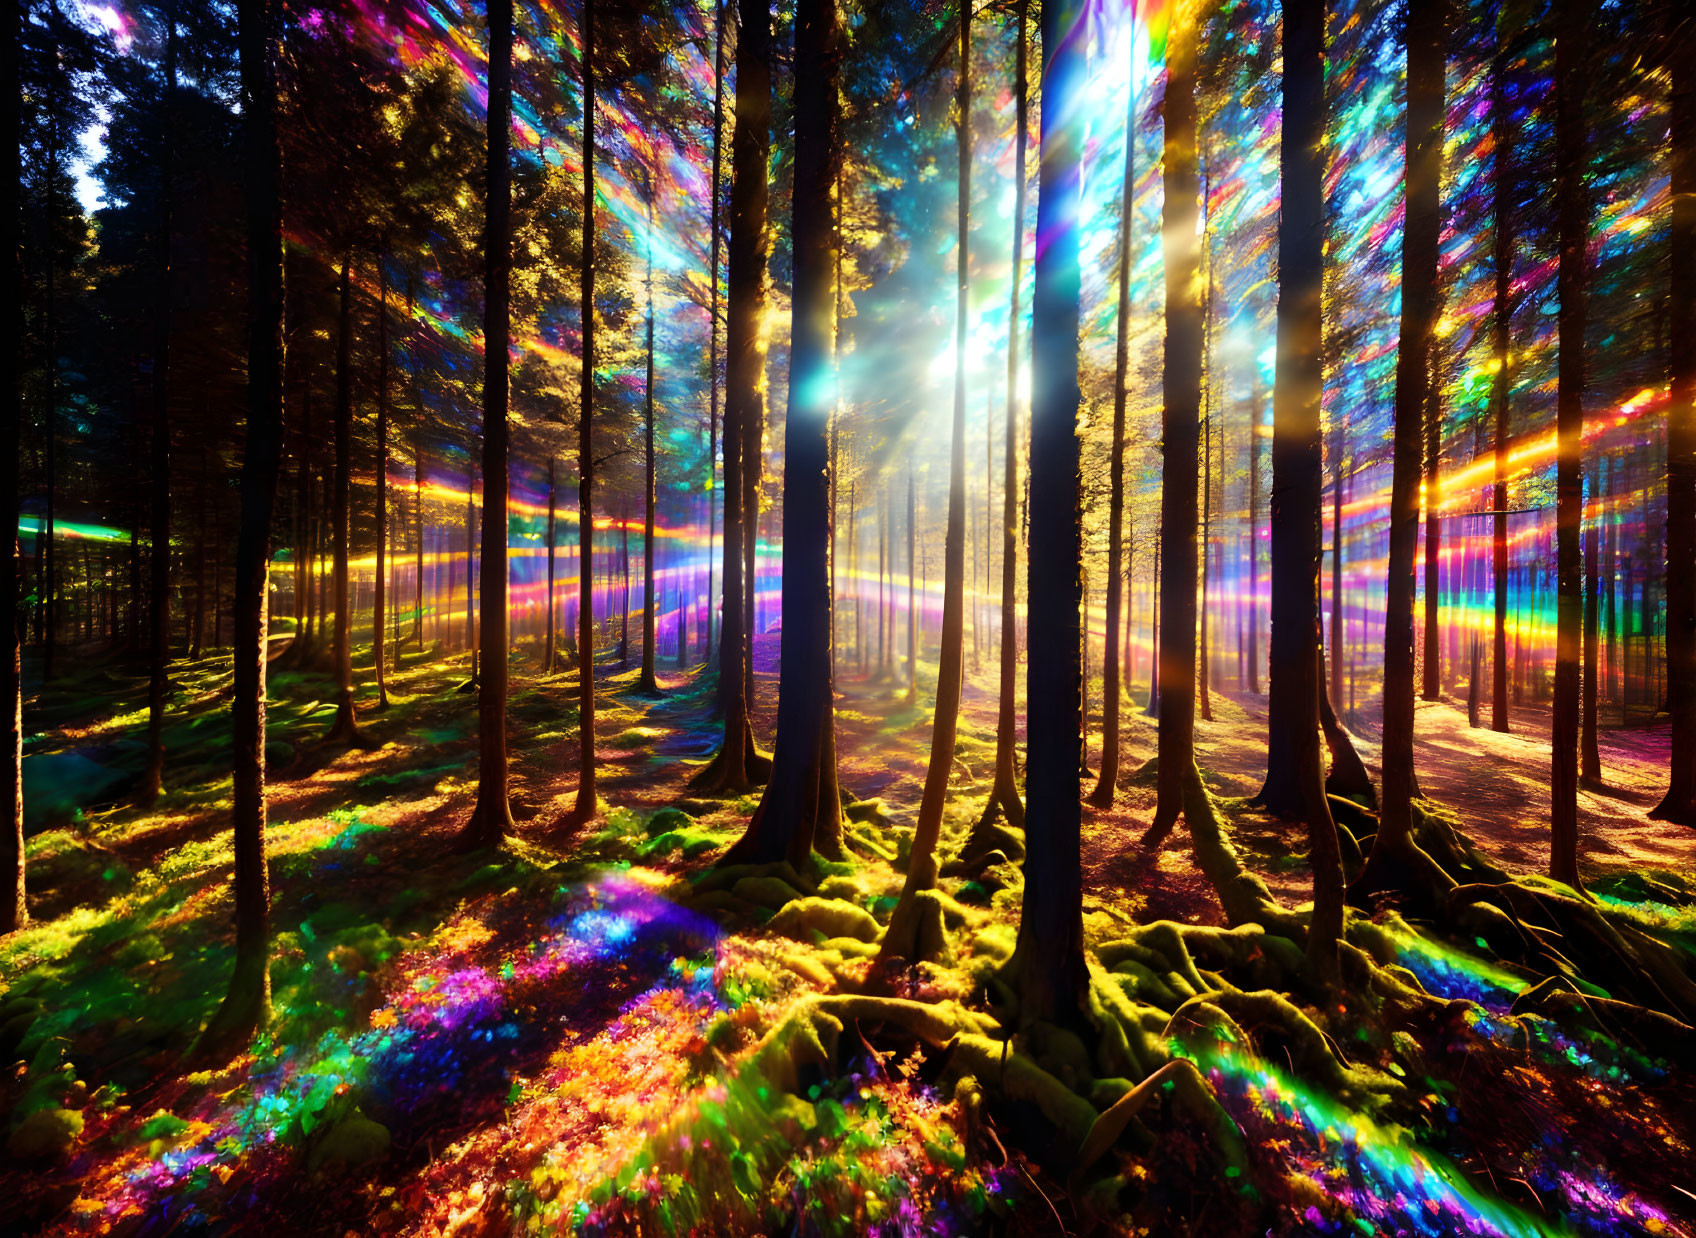 The Magic Forest